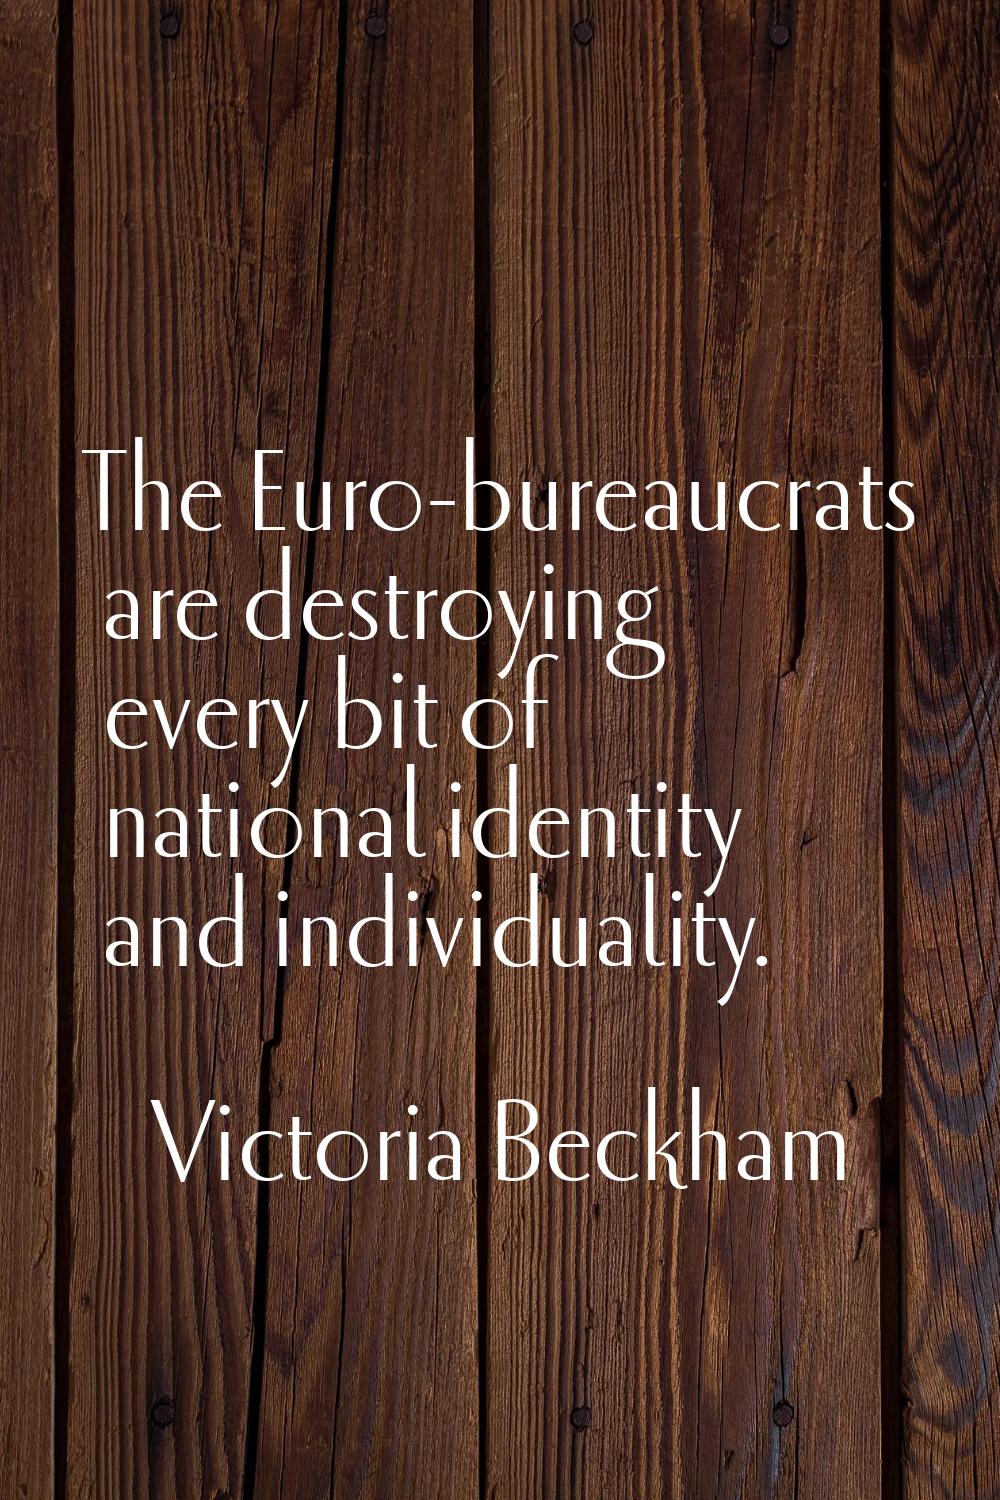 The Euro-bureaucrats are destroying every bit of national identity and individuality.